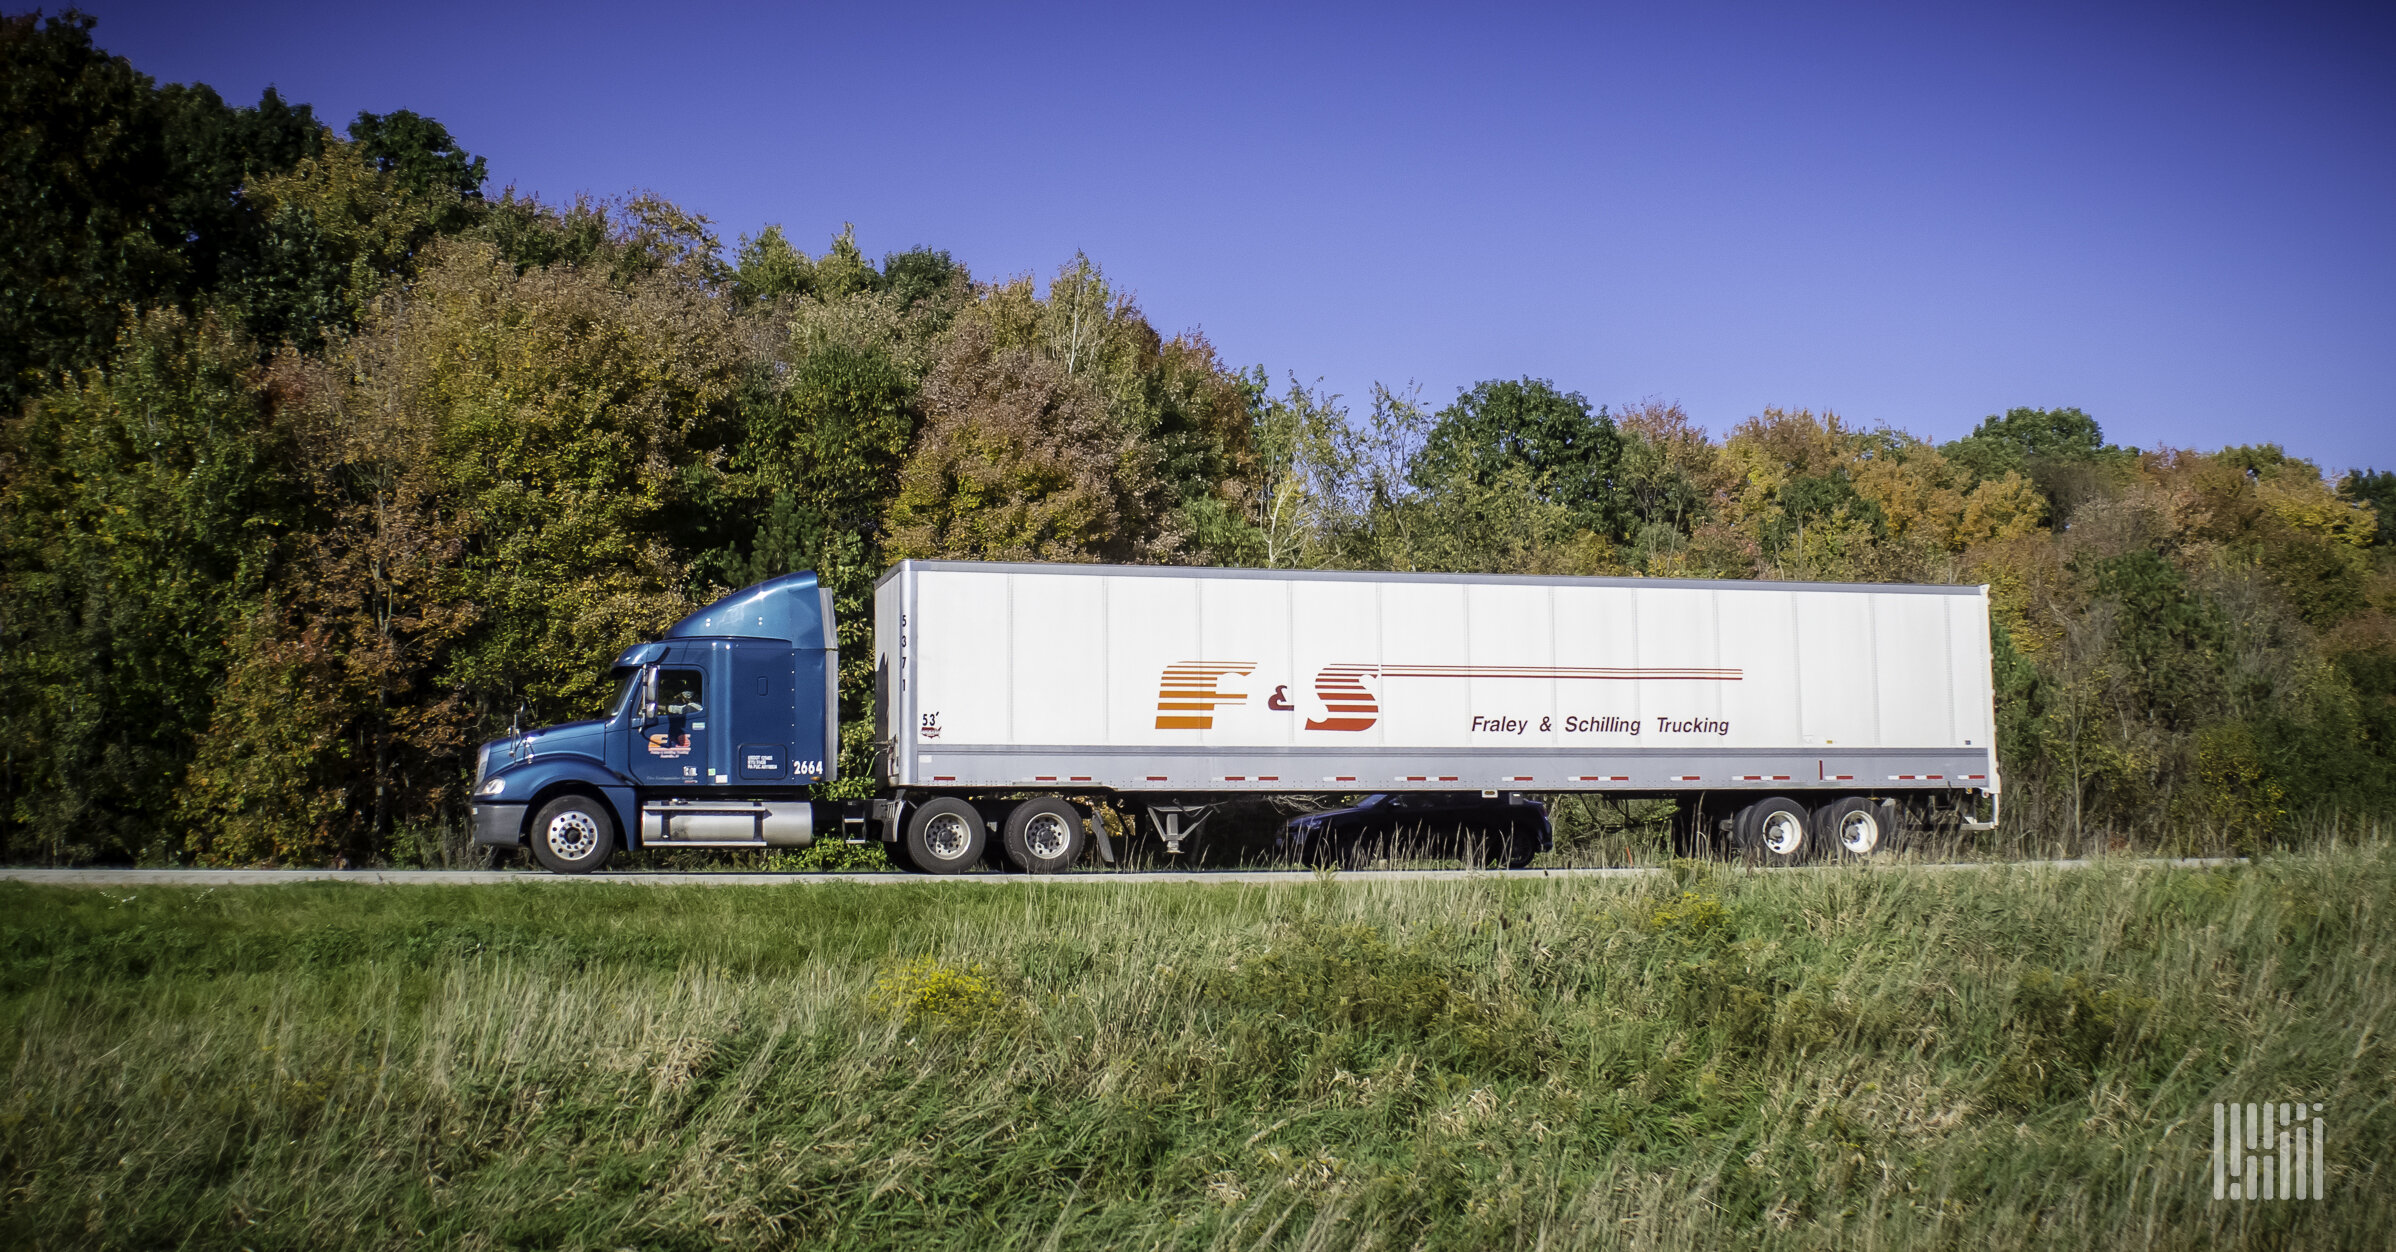 Fraley &amp; Schilling has acquired the assets of KBT Enterprises, an Indiana-based carrier specializing in dry bulk material transportation. (Photo: Jim Allen/FreightWaves)